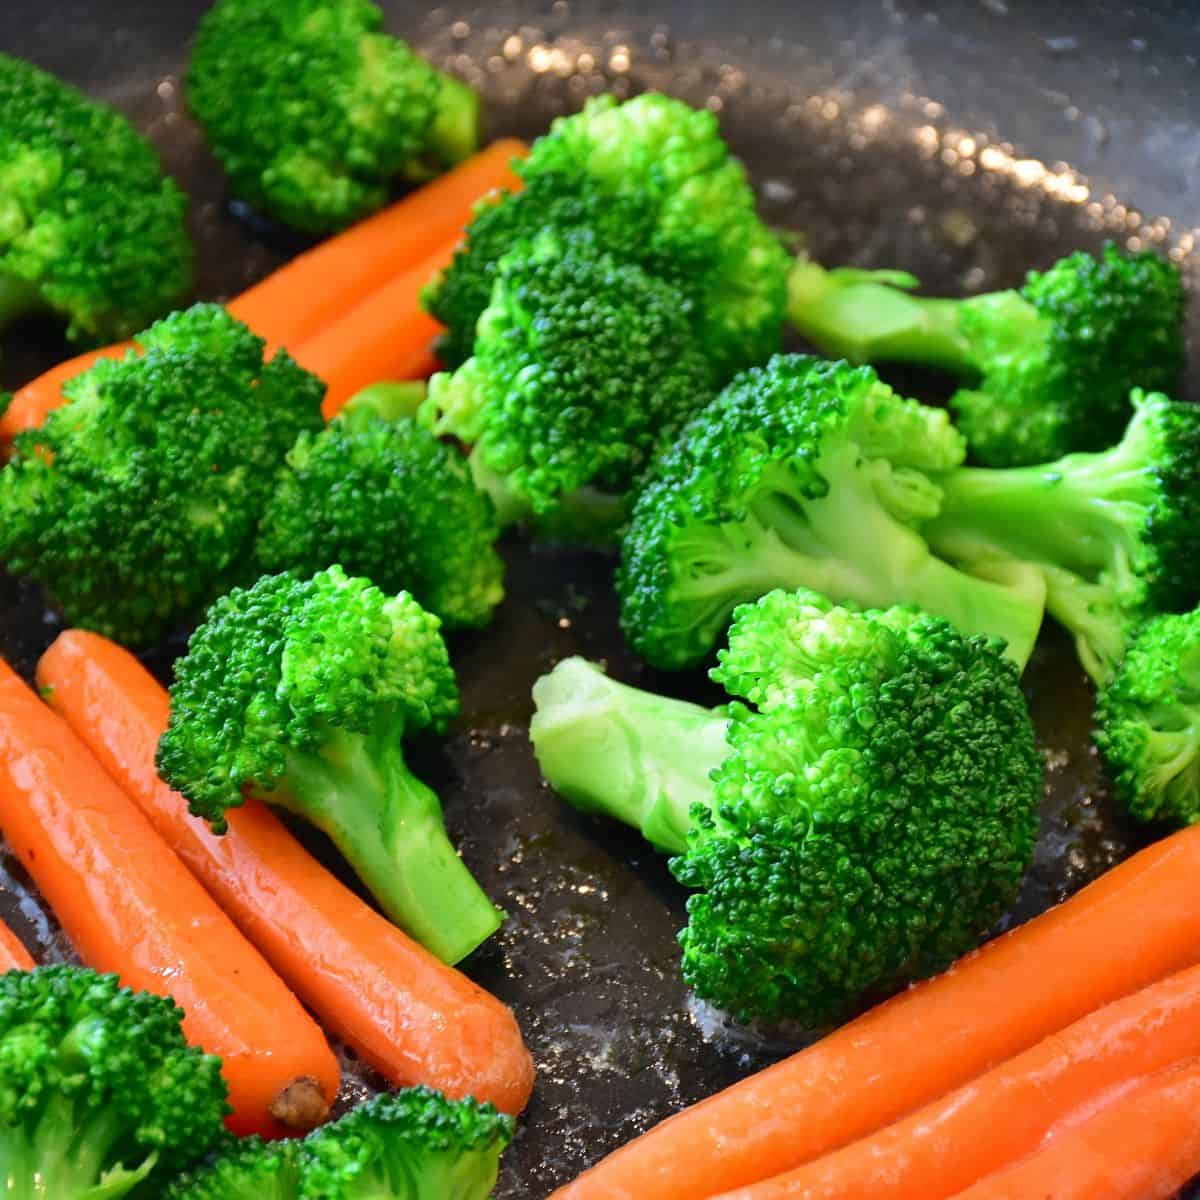 Blanched carrots and broccoli.